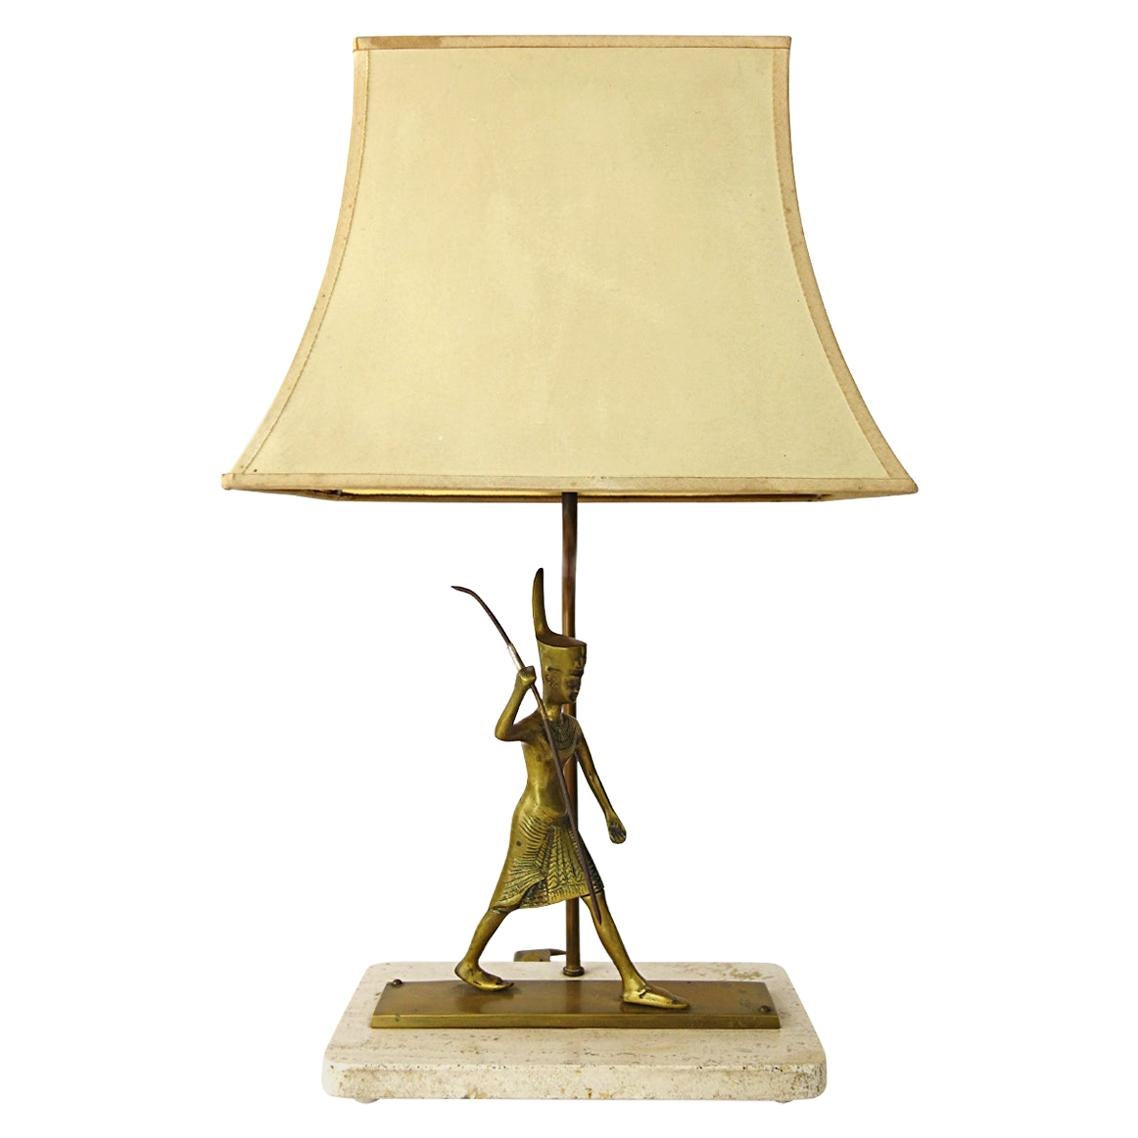 Neoclassical Table Lamp with Marble Foot and Egyptian Warrior under the Shade